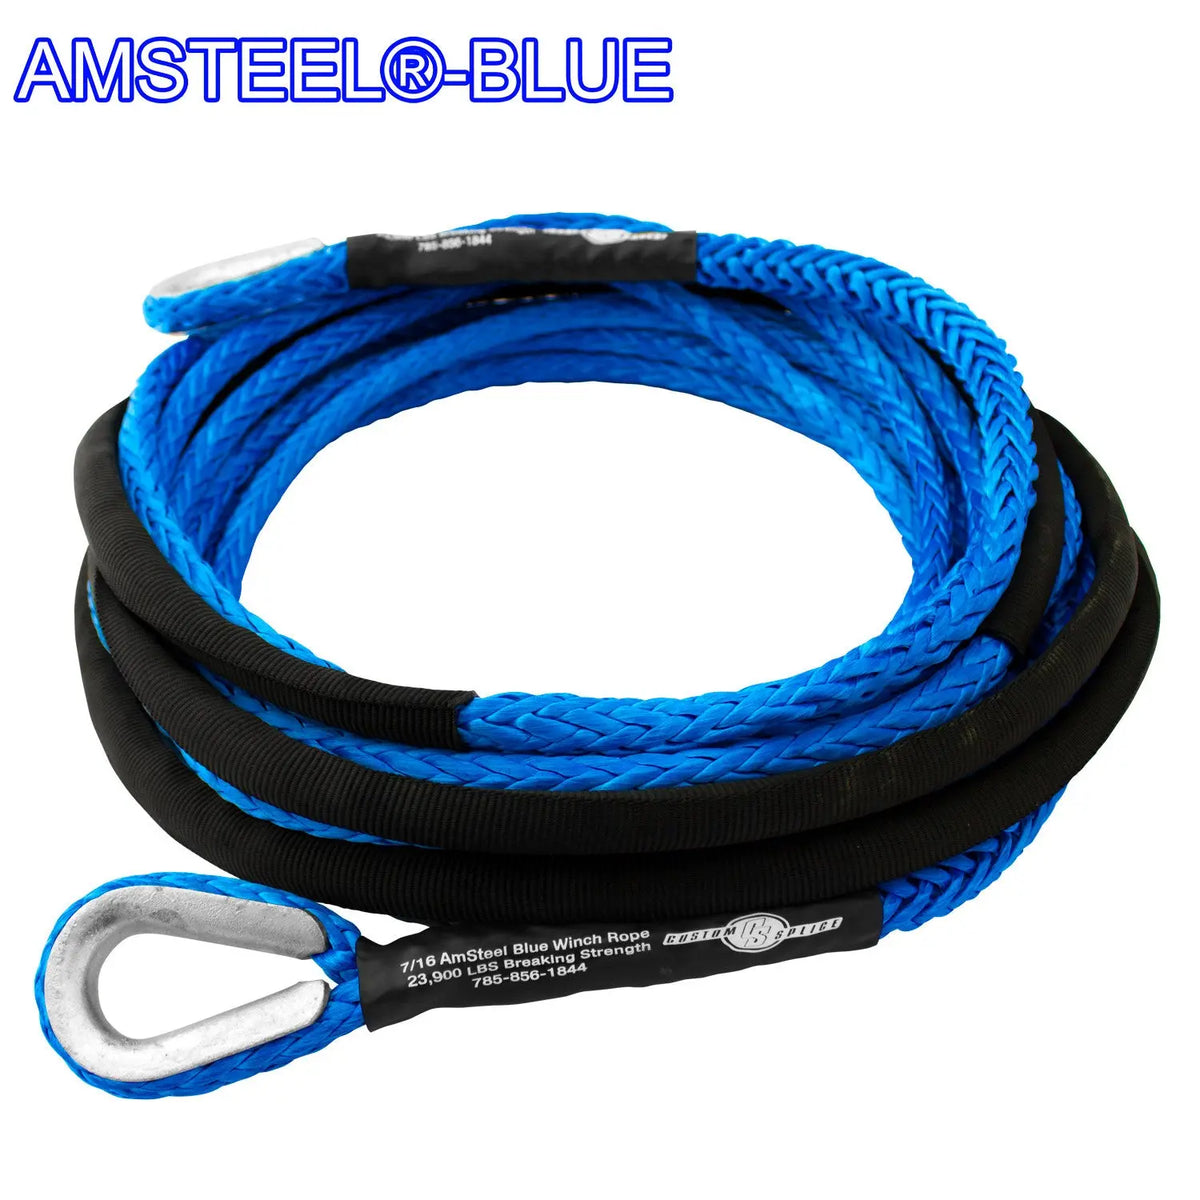 U.S. Made Amsteel Blue Winch Rope 5/16 inch x 100 ft Blue (13 700lb Strength) (4x4 Vehicle Recovery), Multicolor